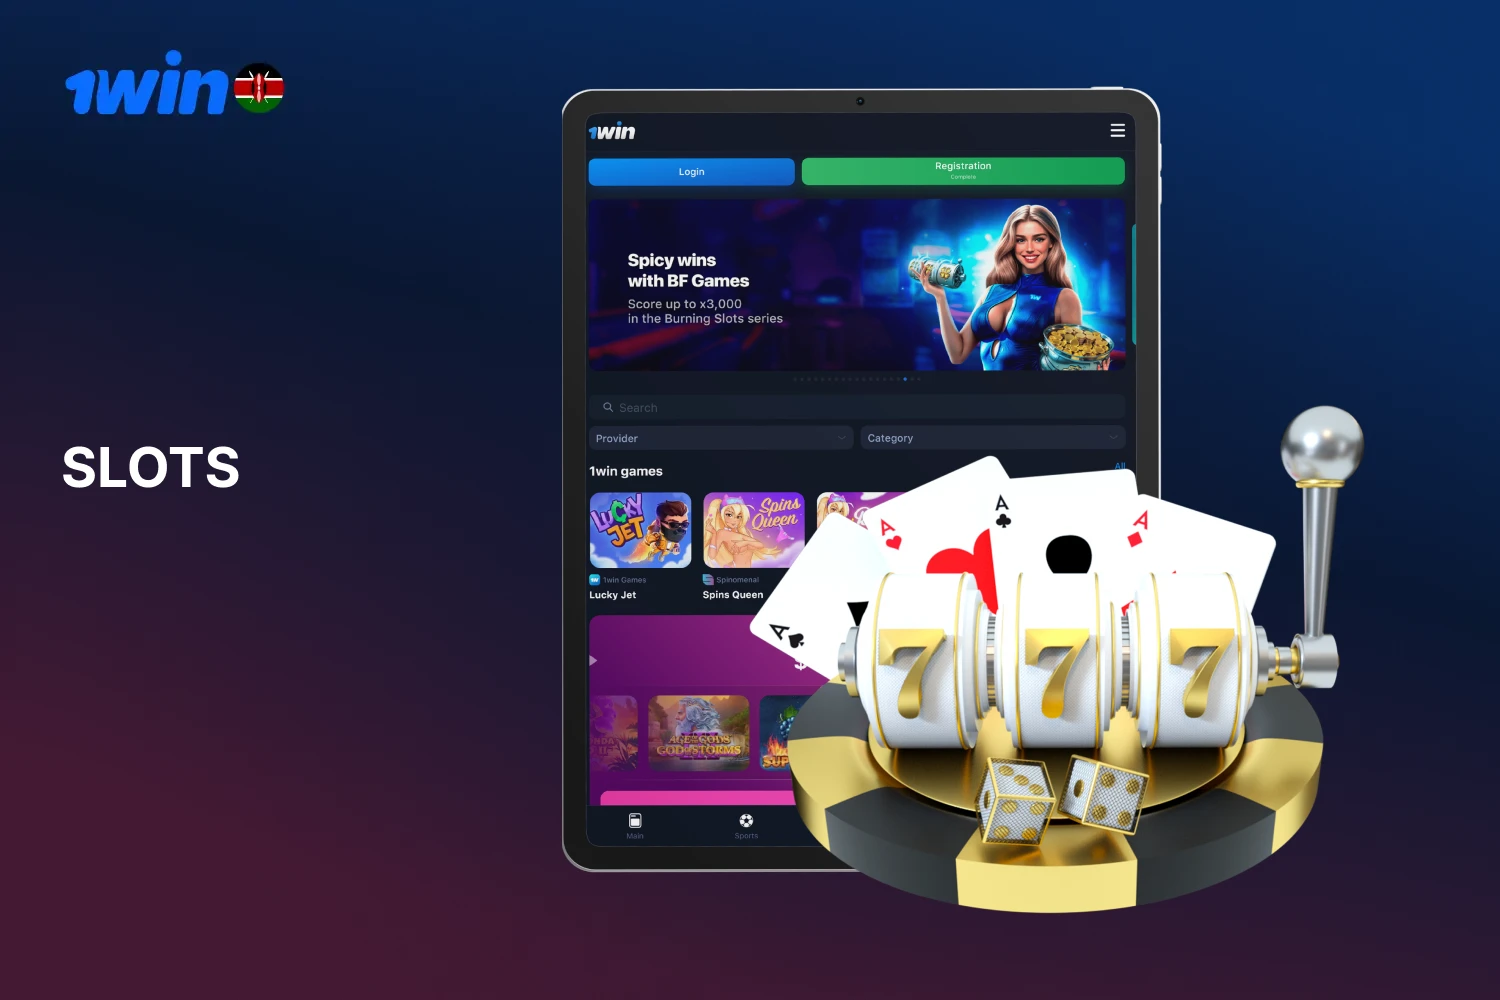 The slots page features over 11,000 slots available to play at 1win Kenya